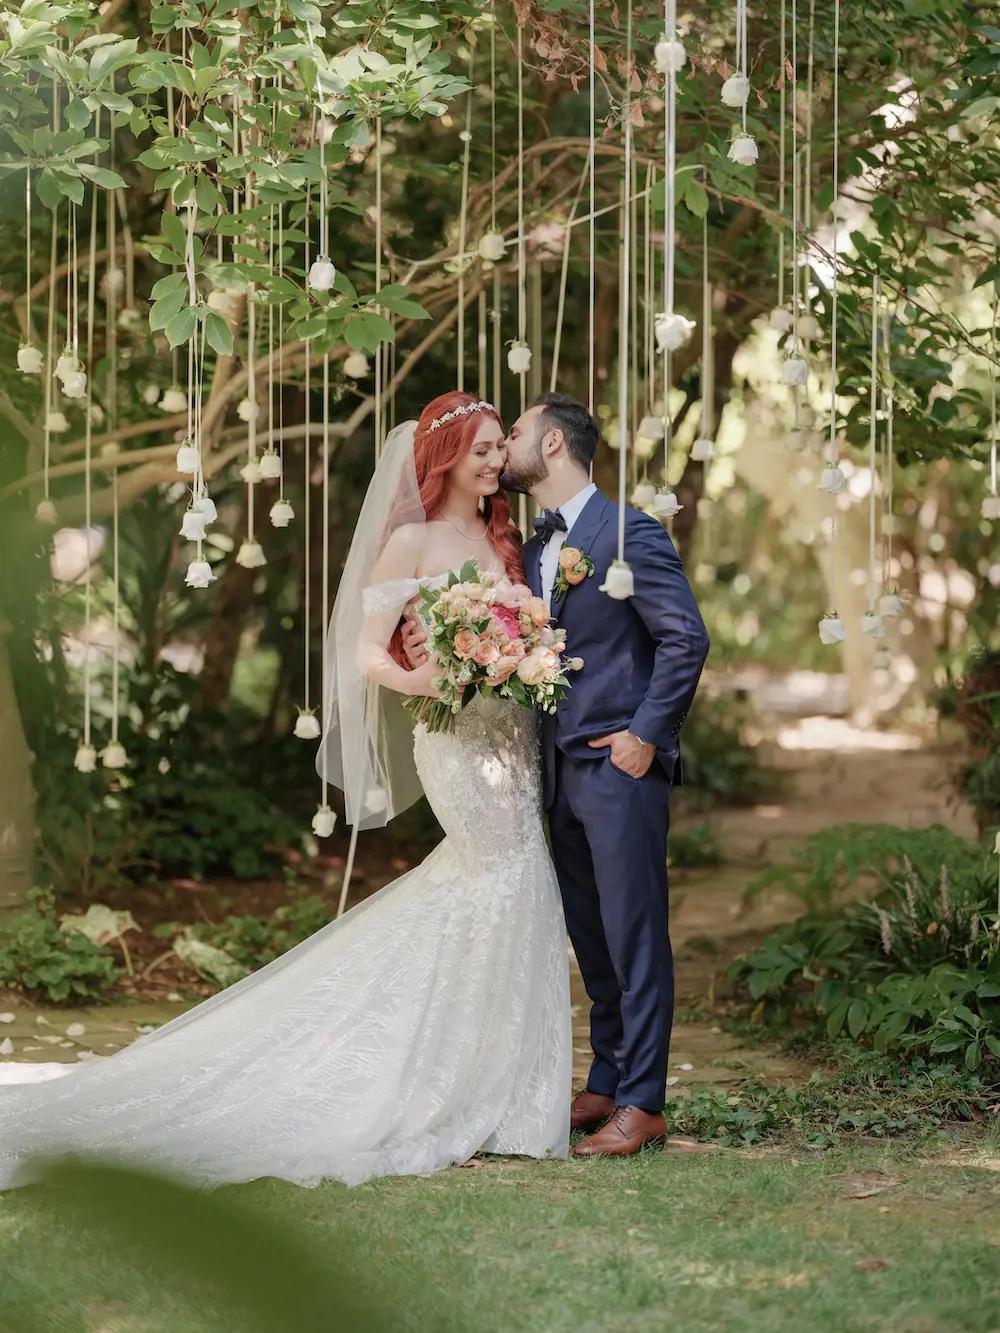 Mara Marries in Beverly Hills Wearing a Sparkly Berta Gown Image